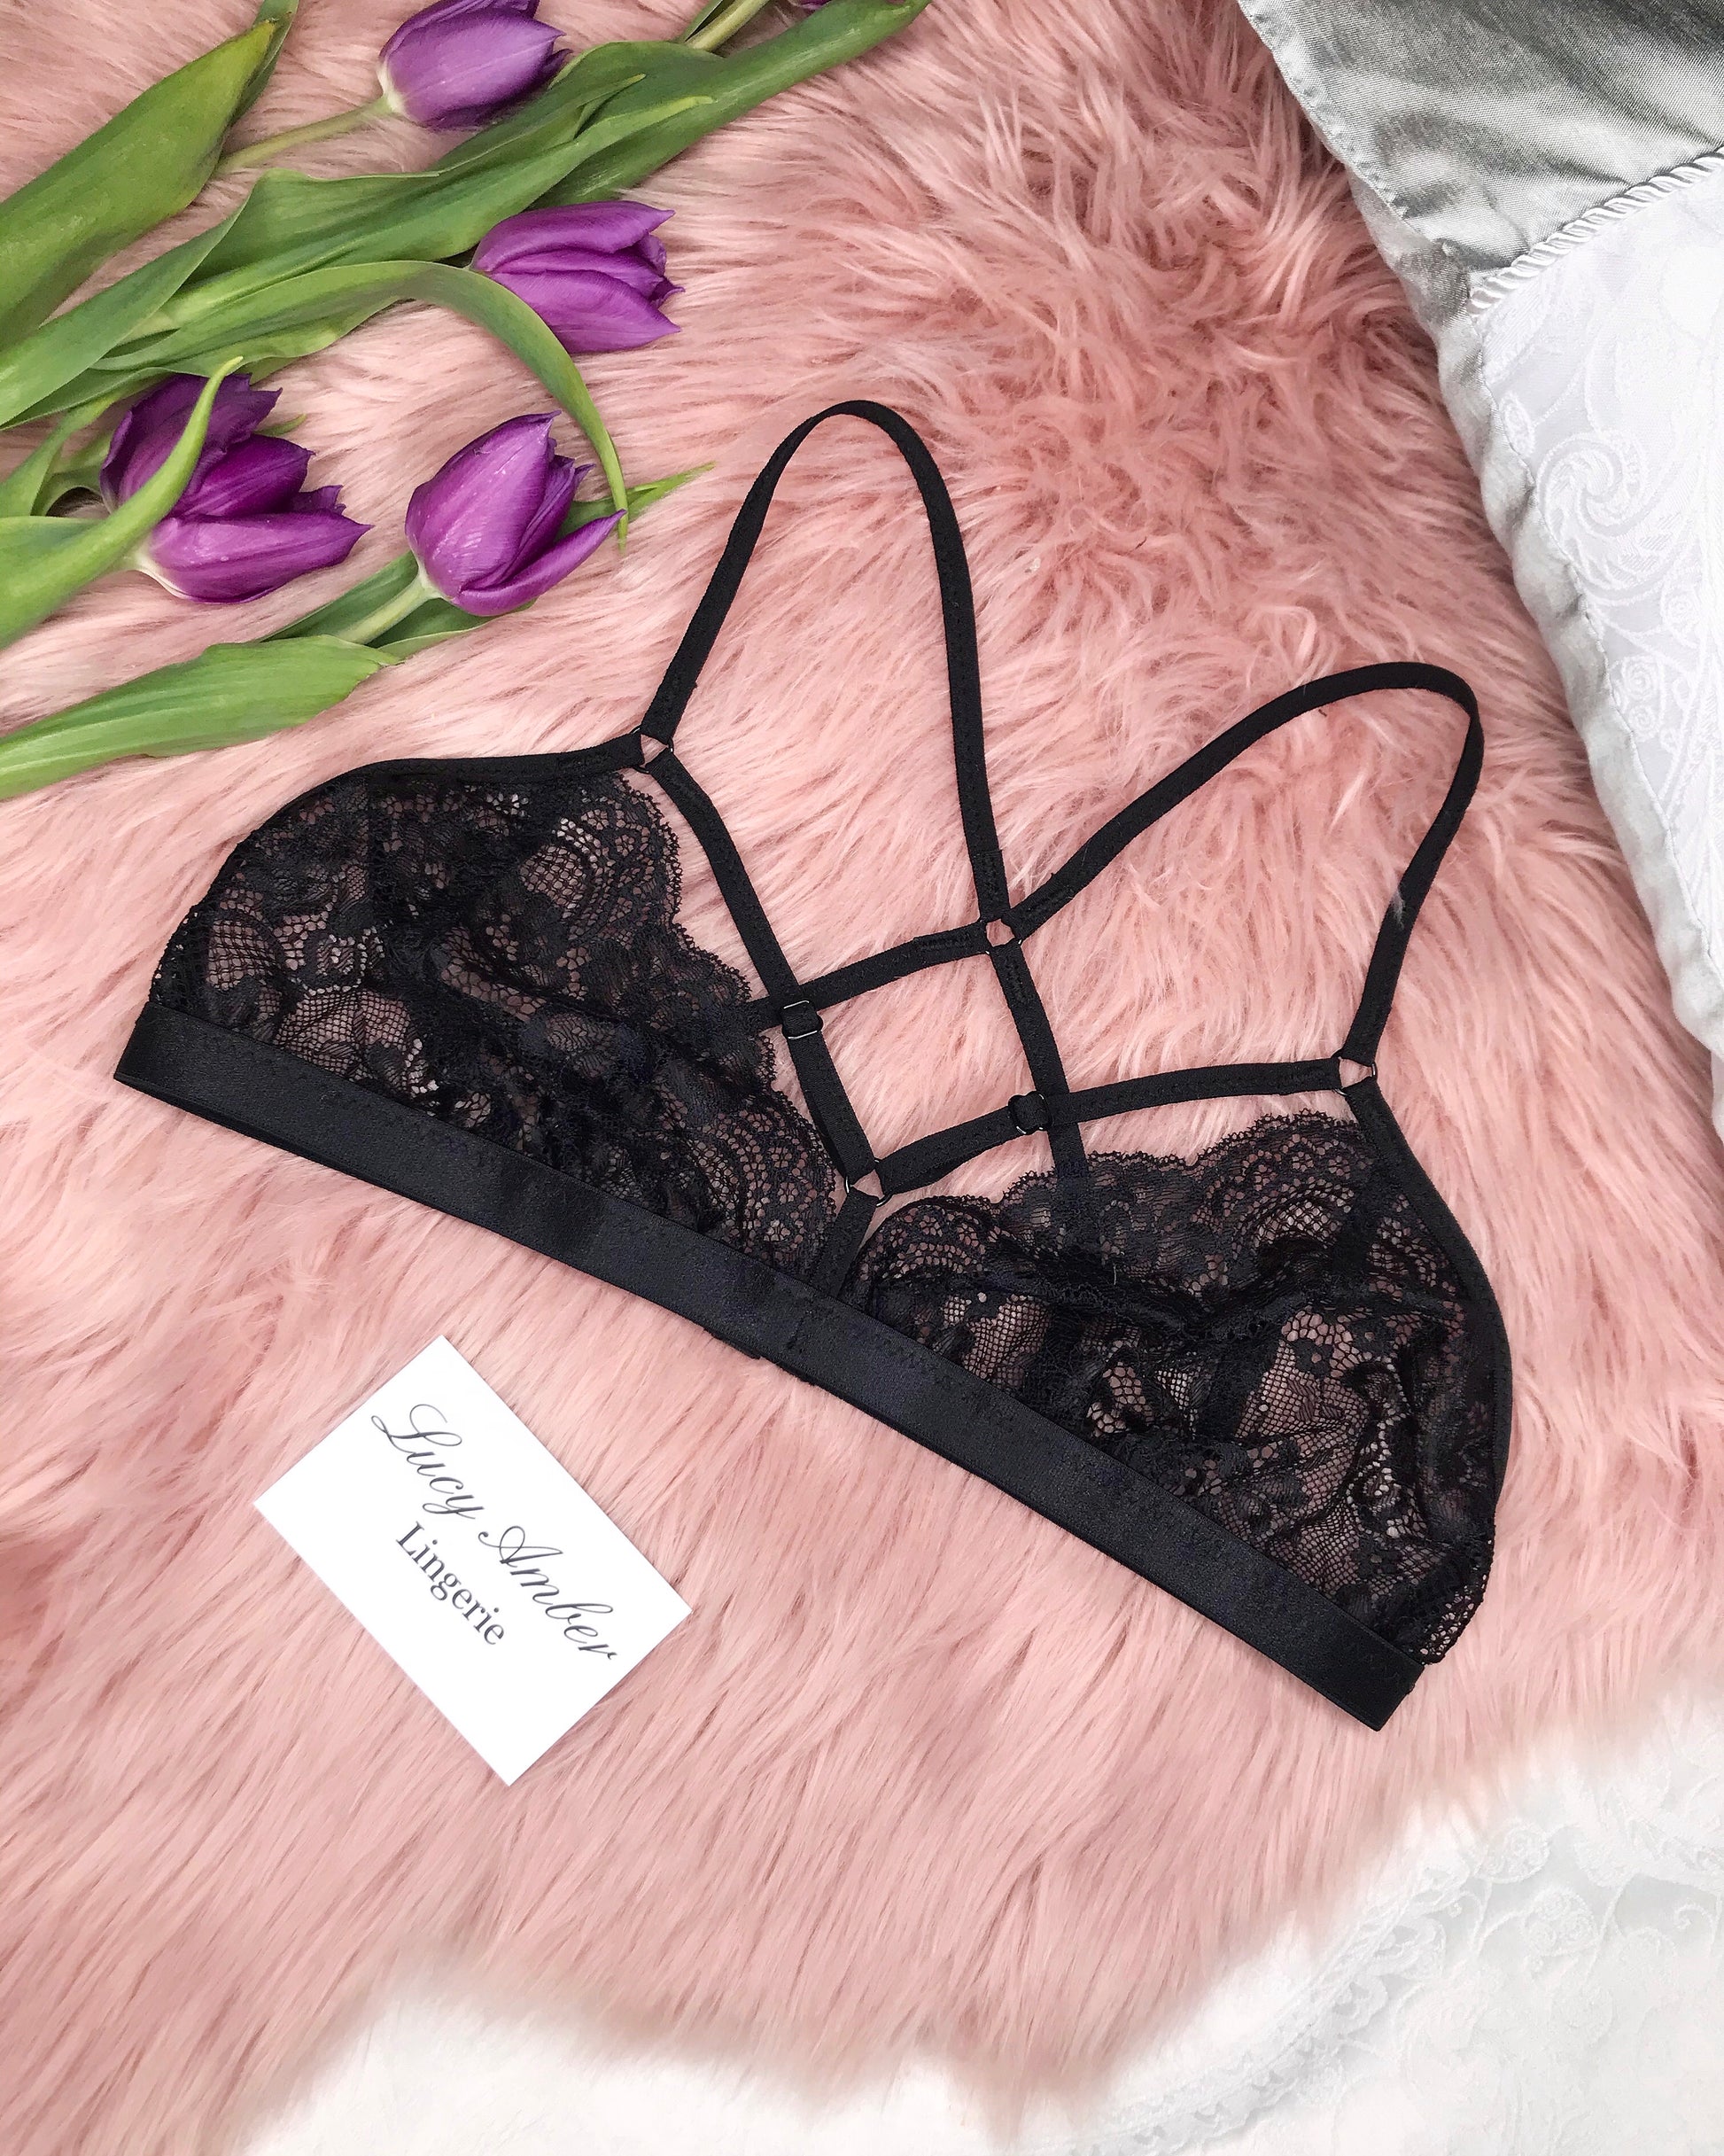 Lucy Amber Lingerie Matilda Black Lace Strappy Bralette